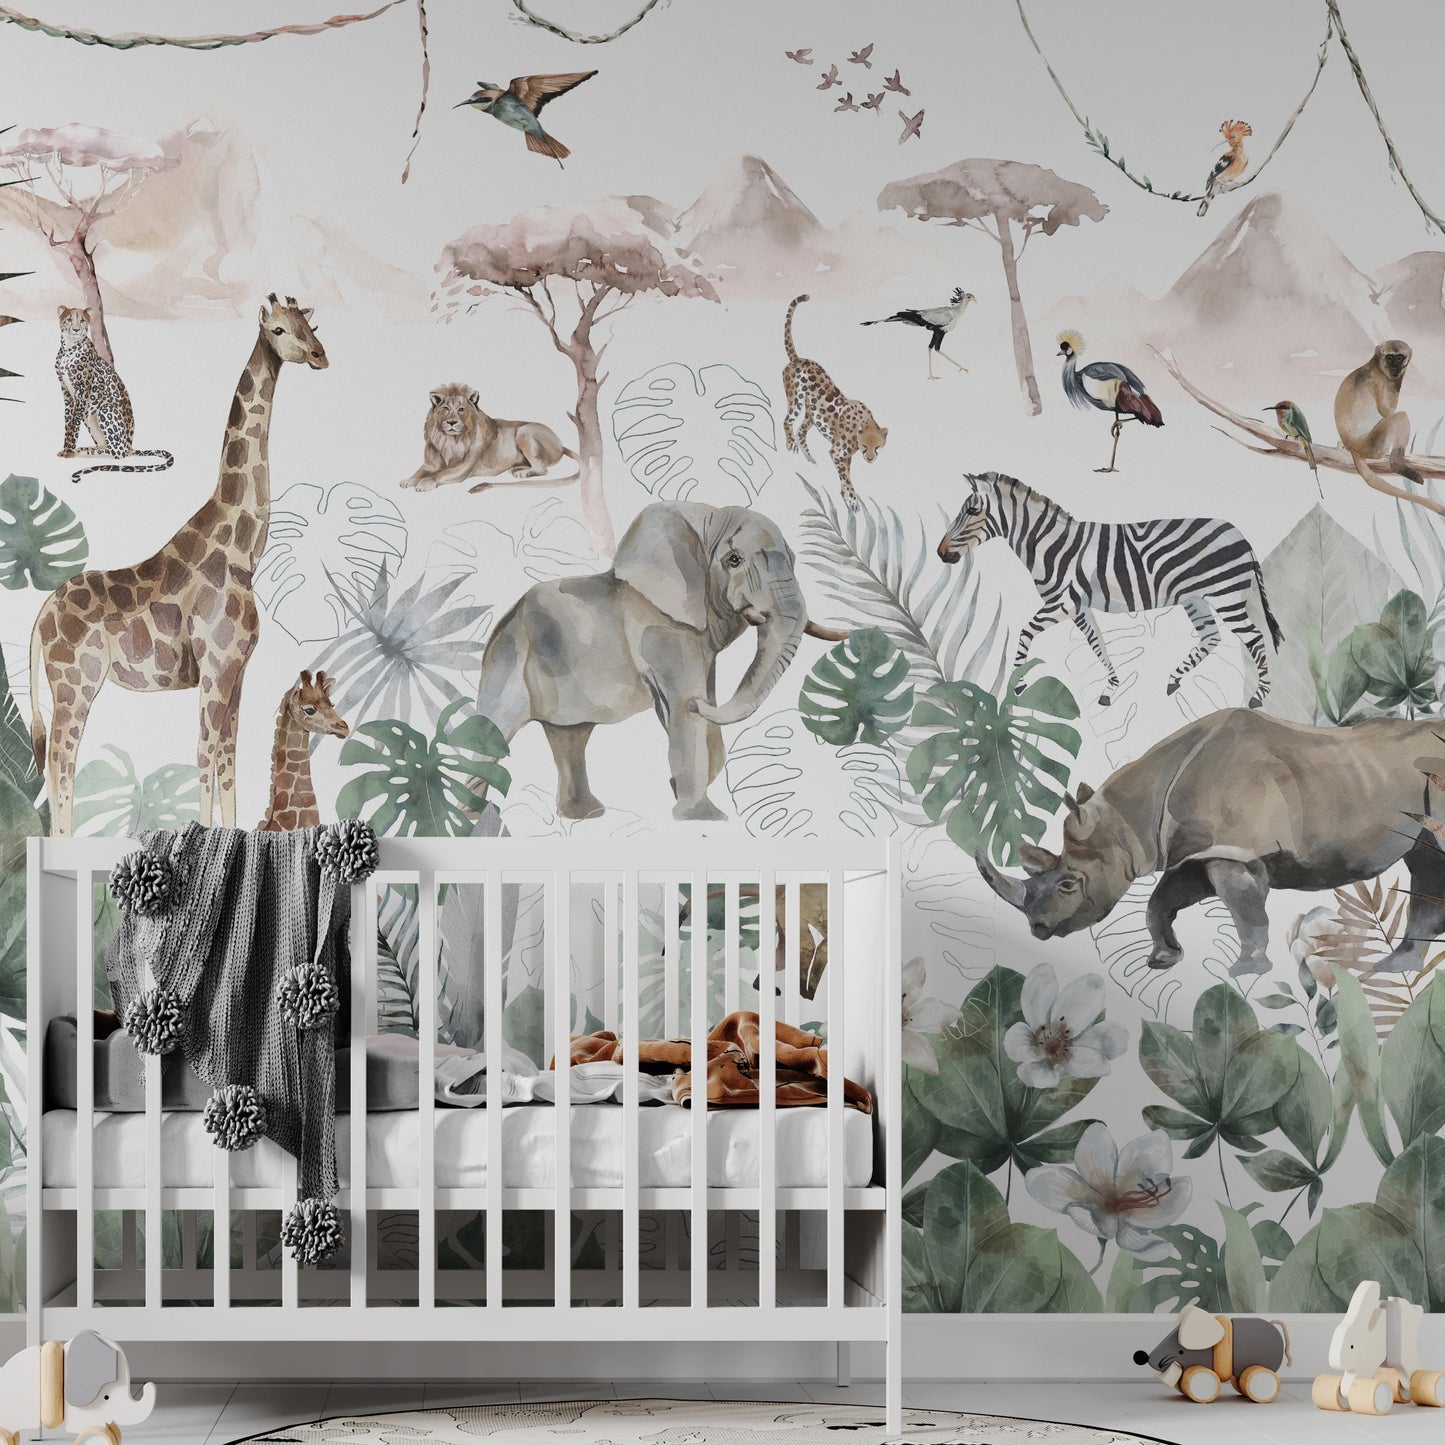 The Most Heavenly Nursery Wallpaper? Paradise Jungle, Of Course!